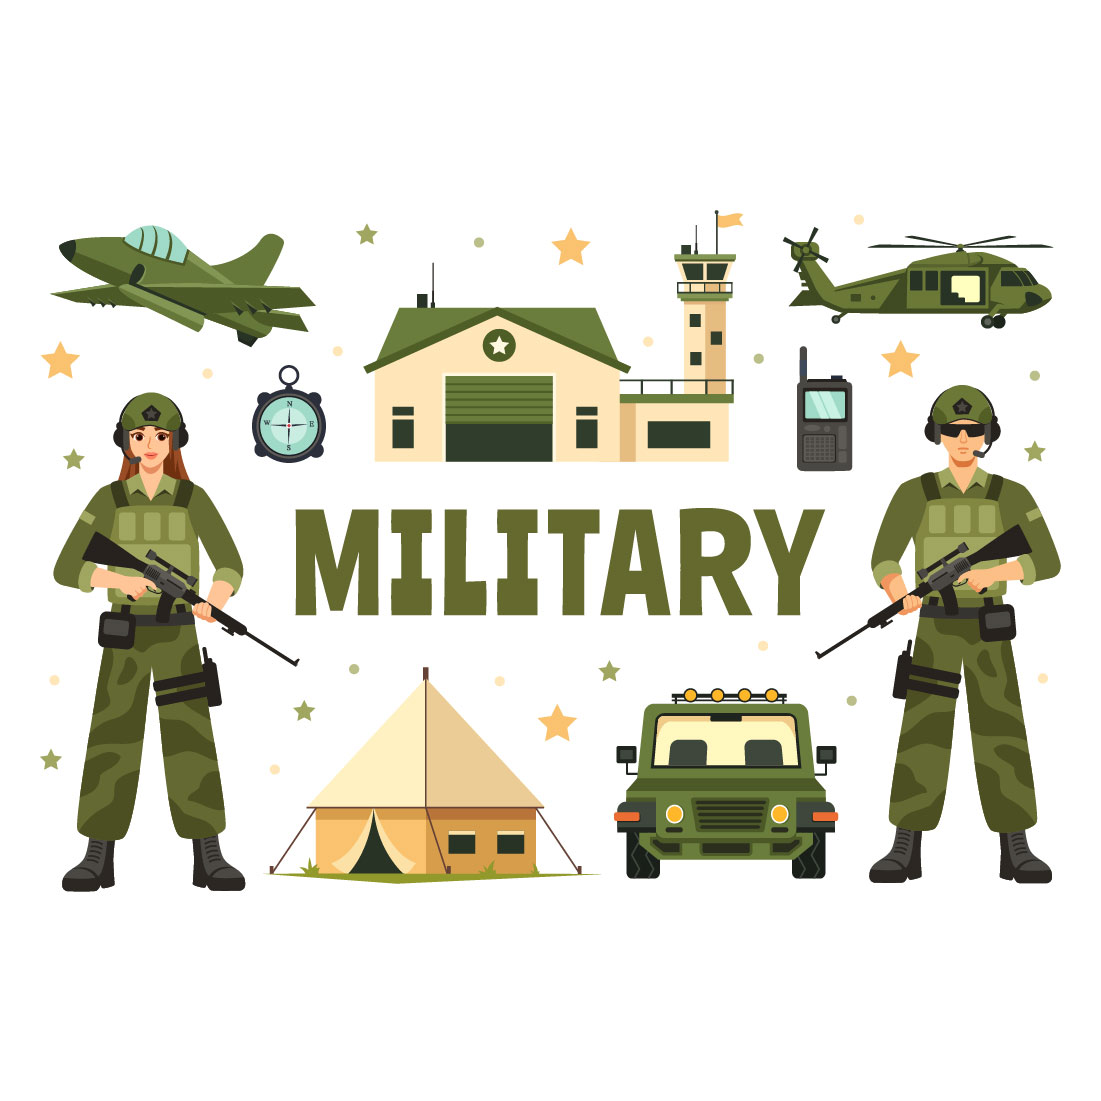 13 Military Army Force Illustration preview image.